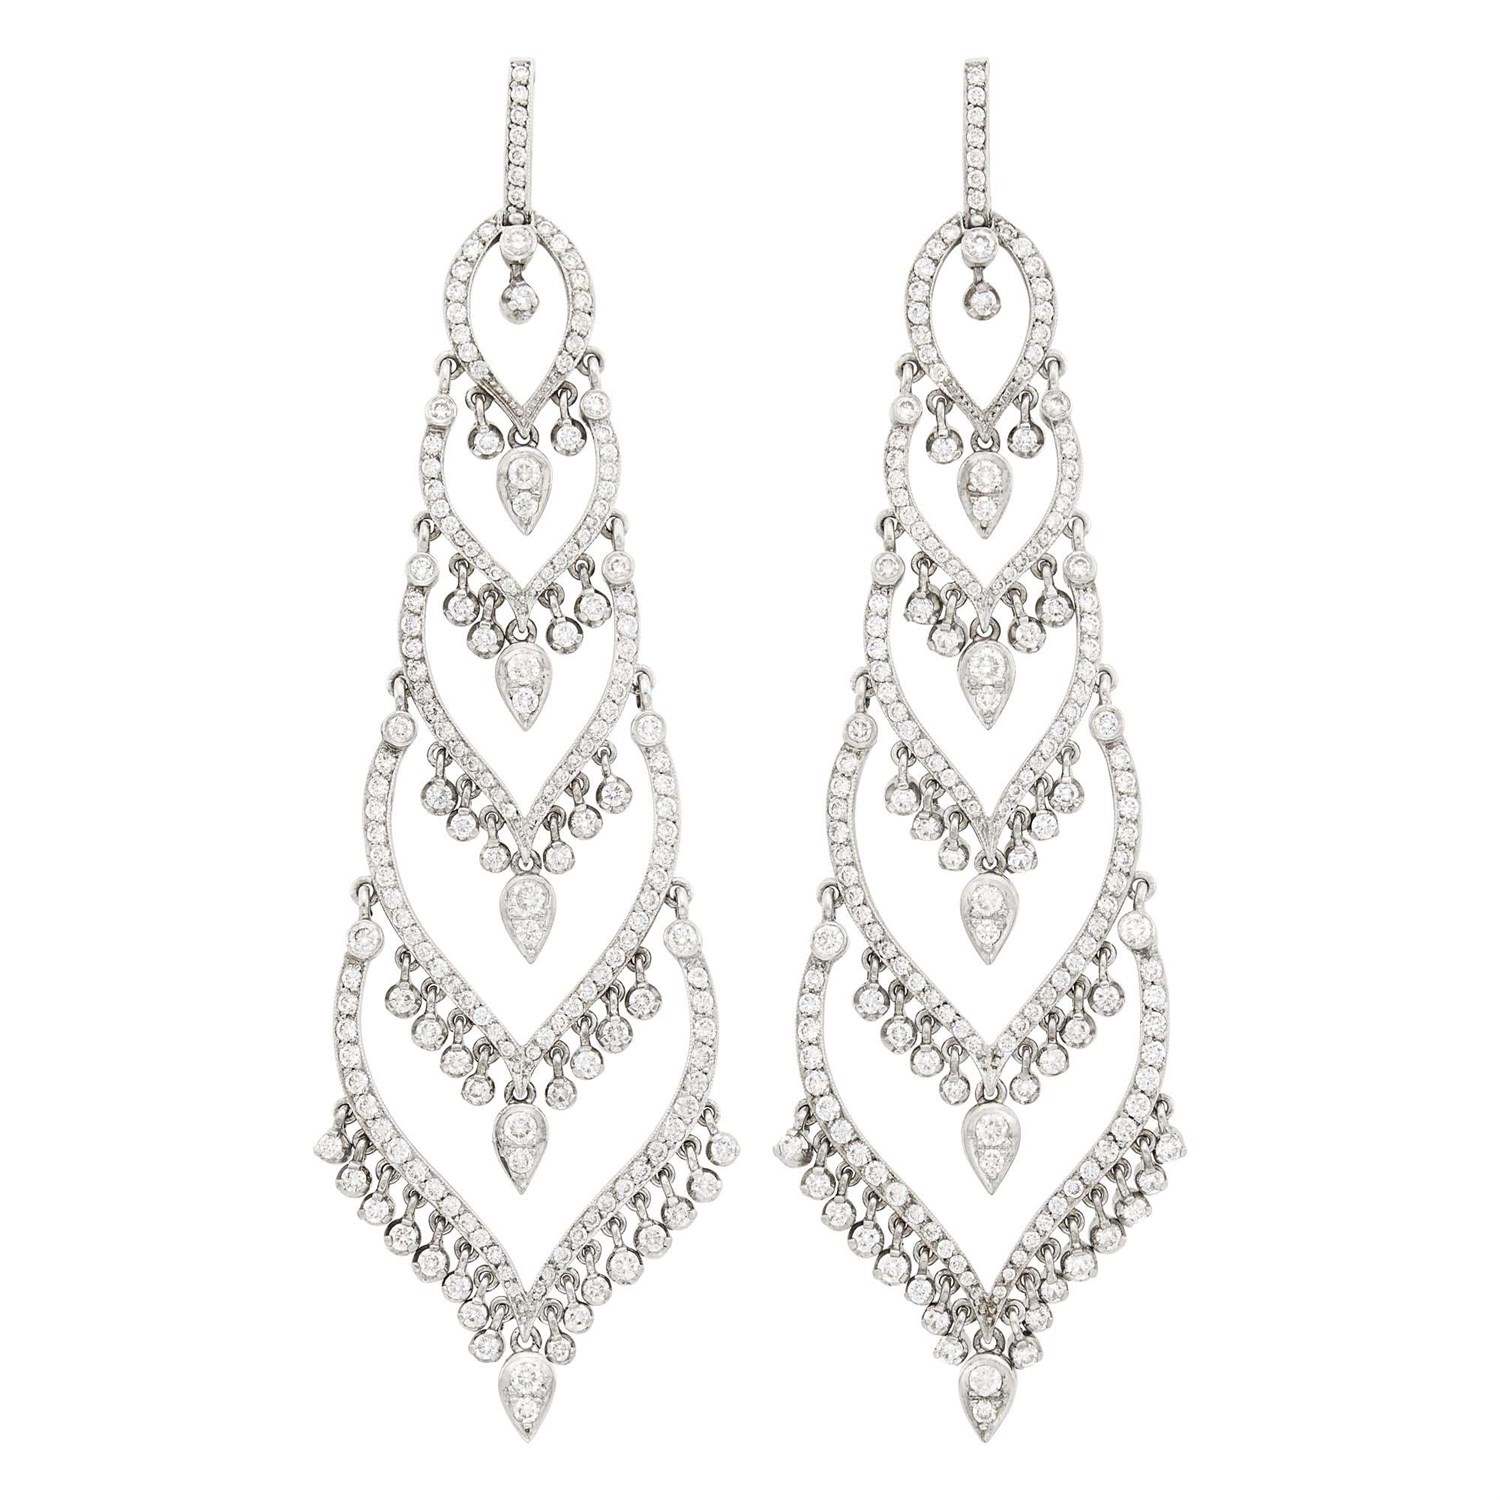 Lot 63 - Pair of White Gold and Diamond Pendant-Earrings